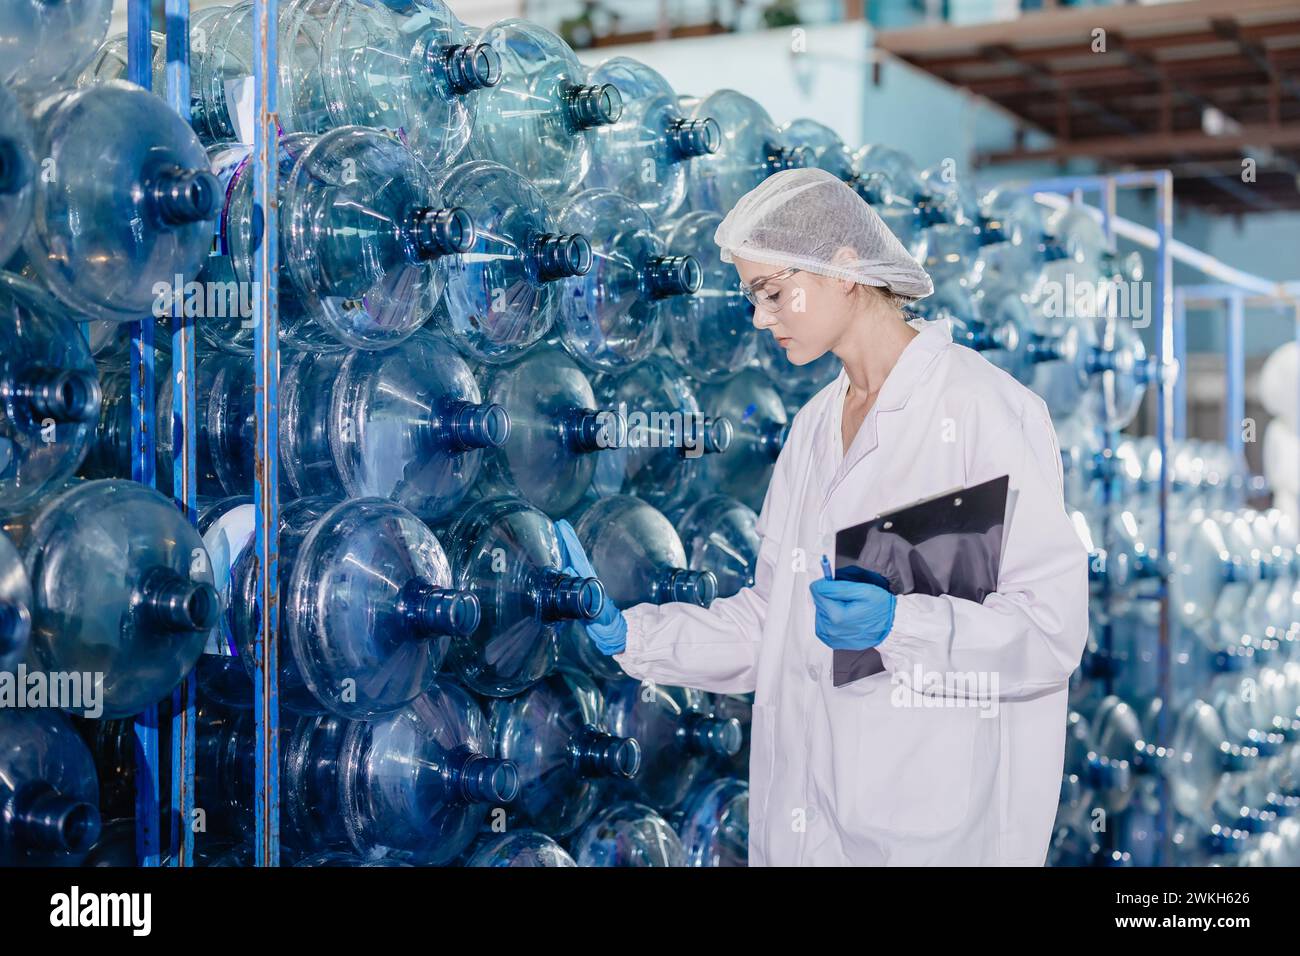 women worker working in drinking water factory inspect counting bottle gallon stock warehouse check counting with hygiene uniform. Stock Photo